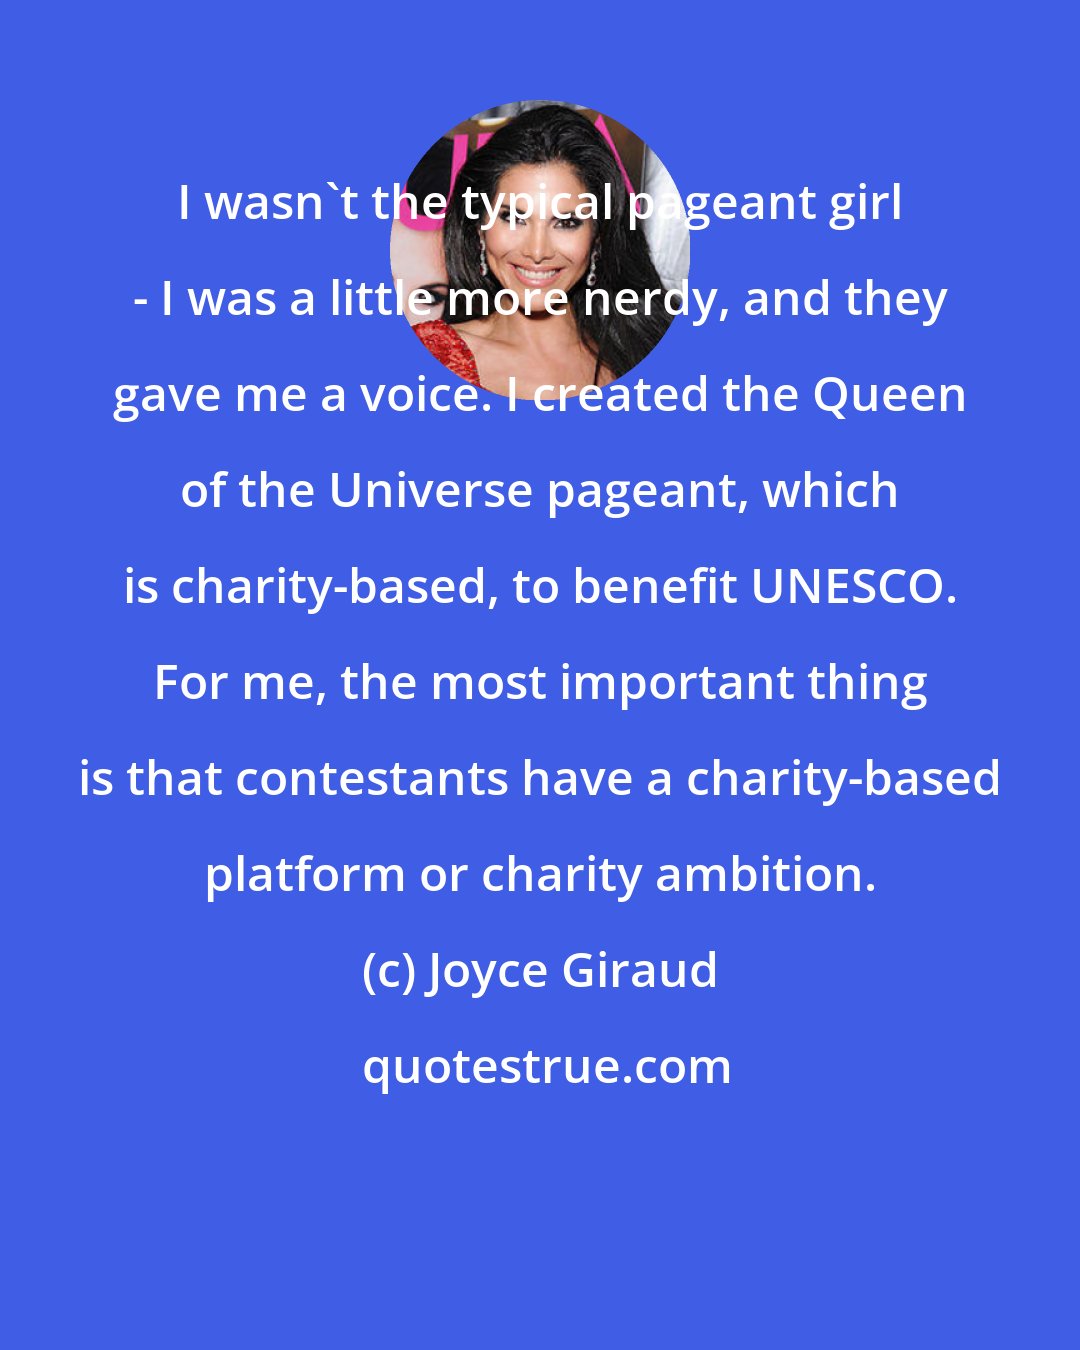 Joyce Giraud: I wasn't the typical pageant girl - I was a little more nerdy, and they gave me a voice. I created the Queen of the Universe pageant, which is charity-based, to benefit UNESCO. For me, the most important thing is that contestants have a charity-based platform or charity ambition.